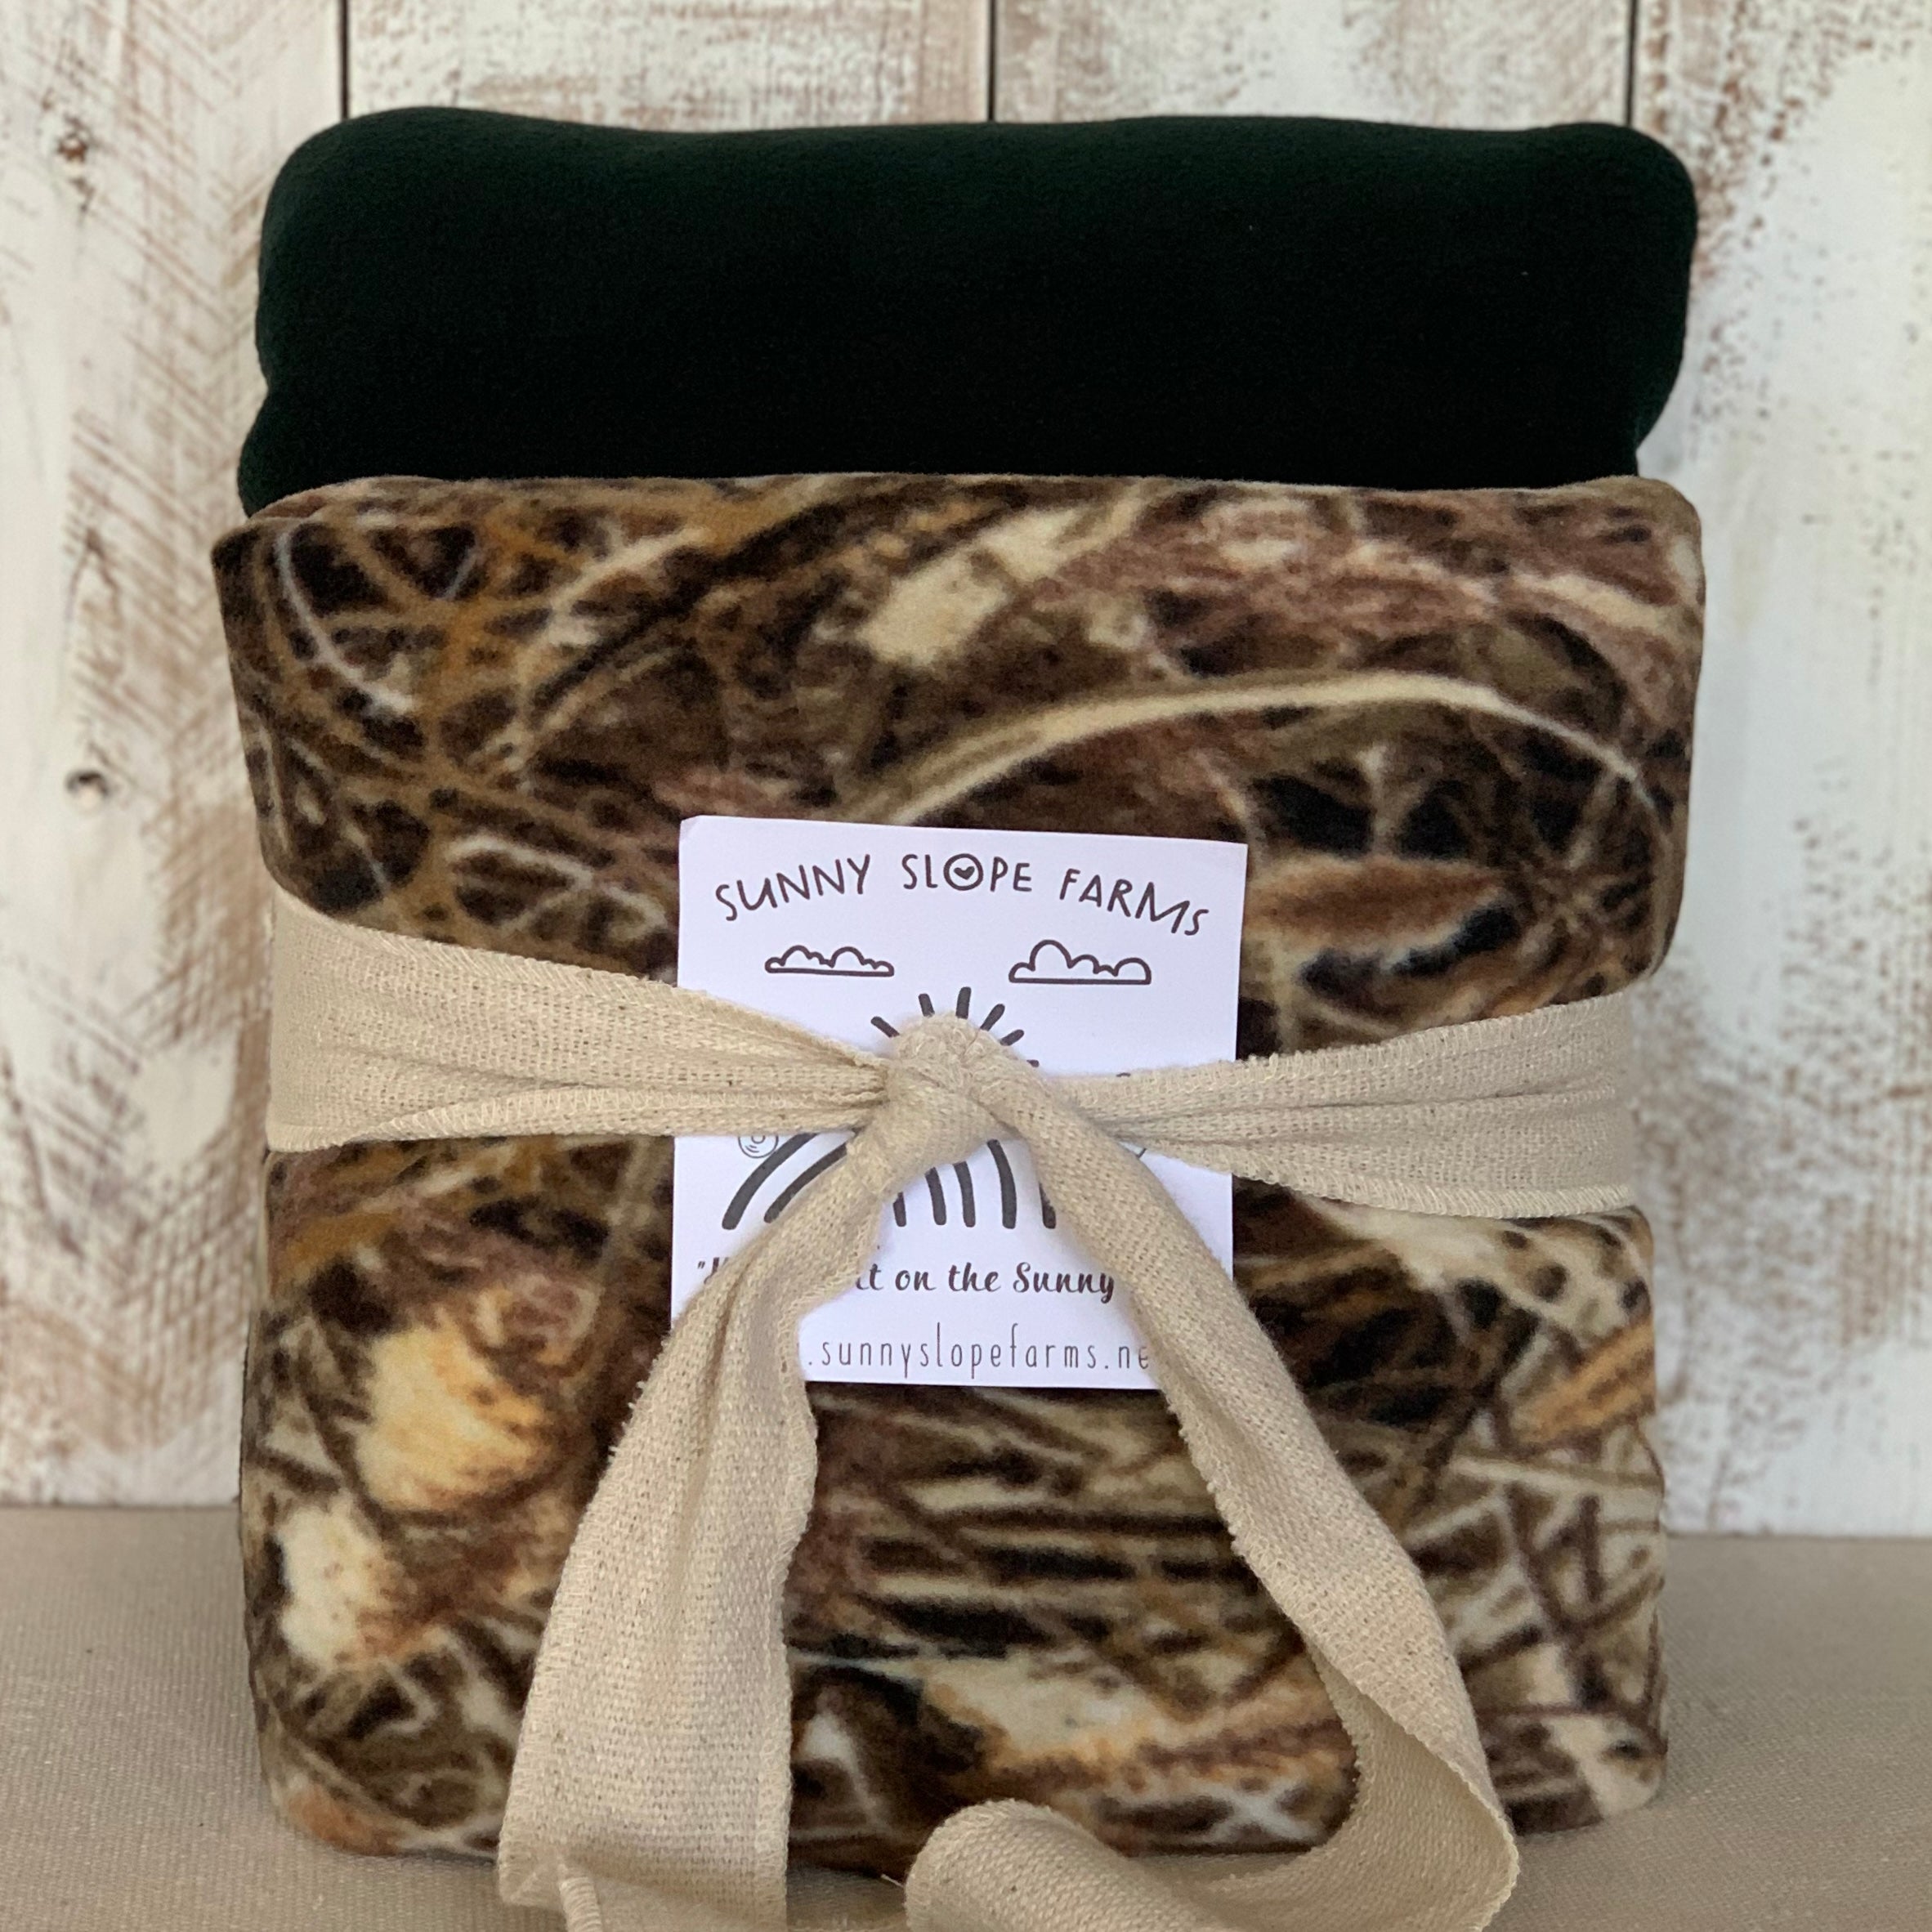 No Sew Blanket Kit - Camo - Personalization Available